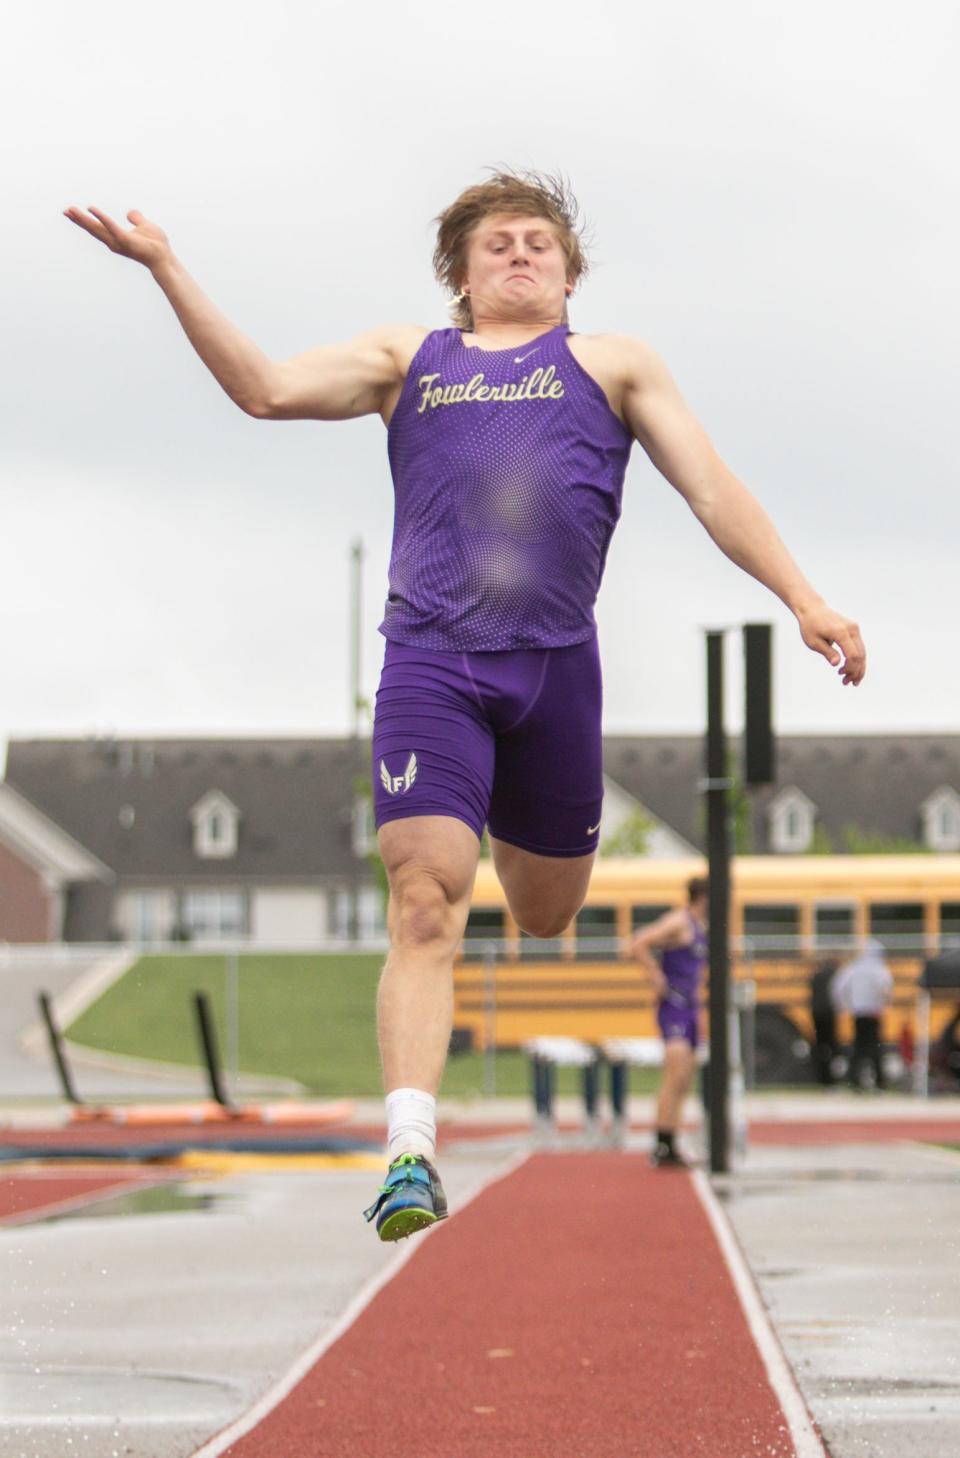 Fowlerville's Jack Shrader tied for first place in the long jump at the CAAC Red track and field meet Wednesday, May 25, 2022 at Lansing Eastern.